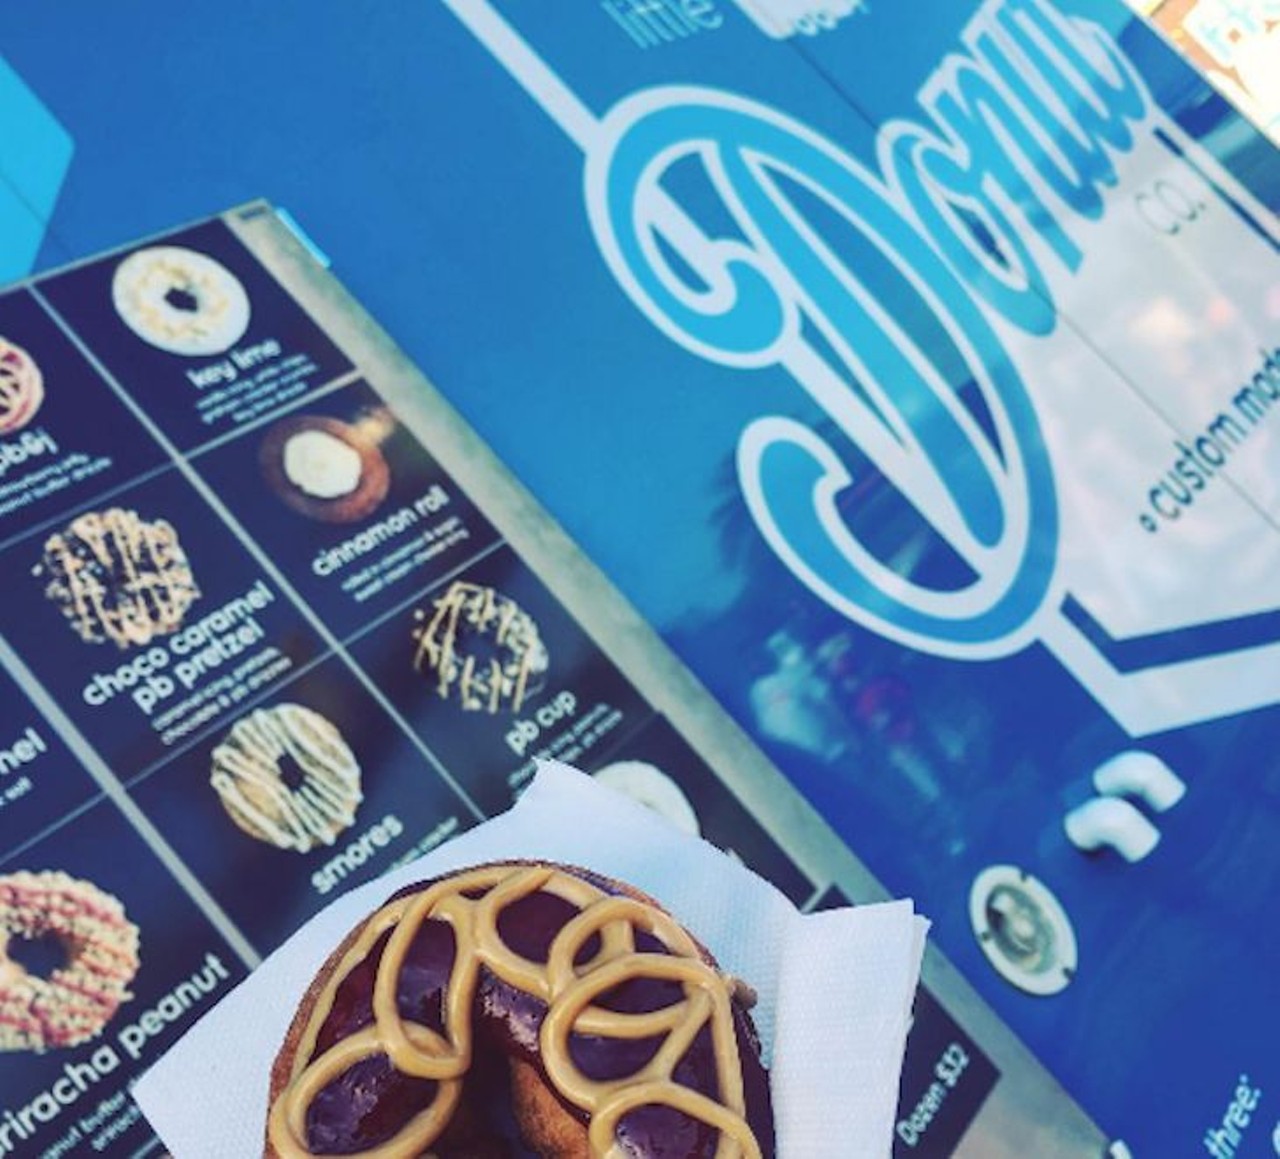 Little Blue Donut Co. 
Address: Varies
The truck roams mainly in the Windermere/Winter Garden/Lake Nona wilds, but can also be found at some Daily City Food Truck Bazaars and Tasty Tuesday events. The peanut-butter cup, Samoa (like the Girl Scout cookie) and salted caramel doughnuts will make your heart &#150; and your fillings &#150; sing.
Photo via itsmilena/Instagram